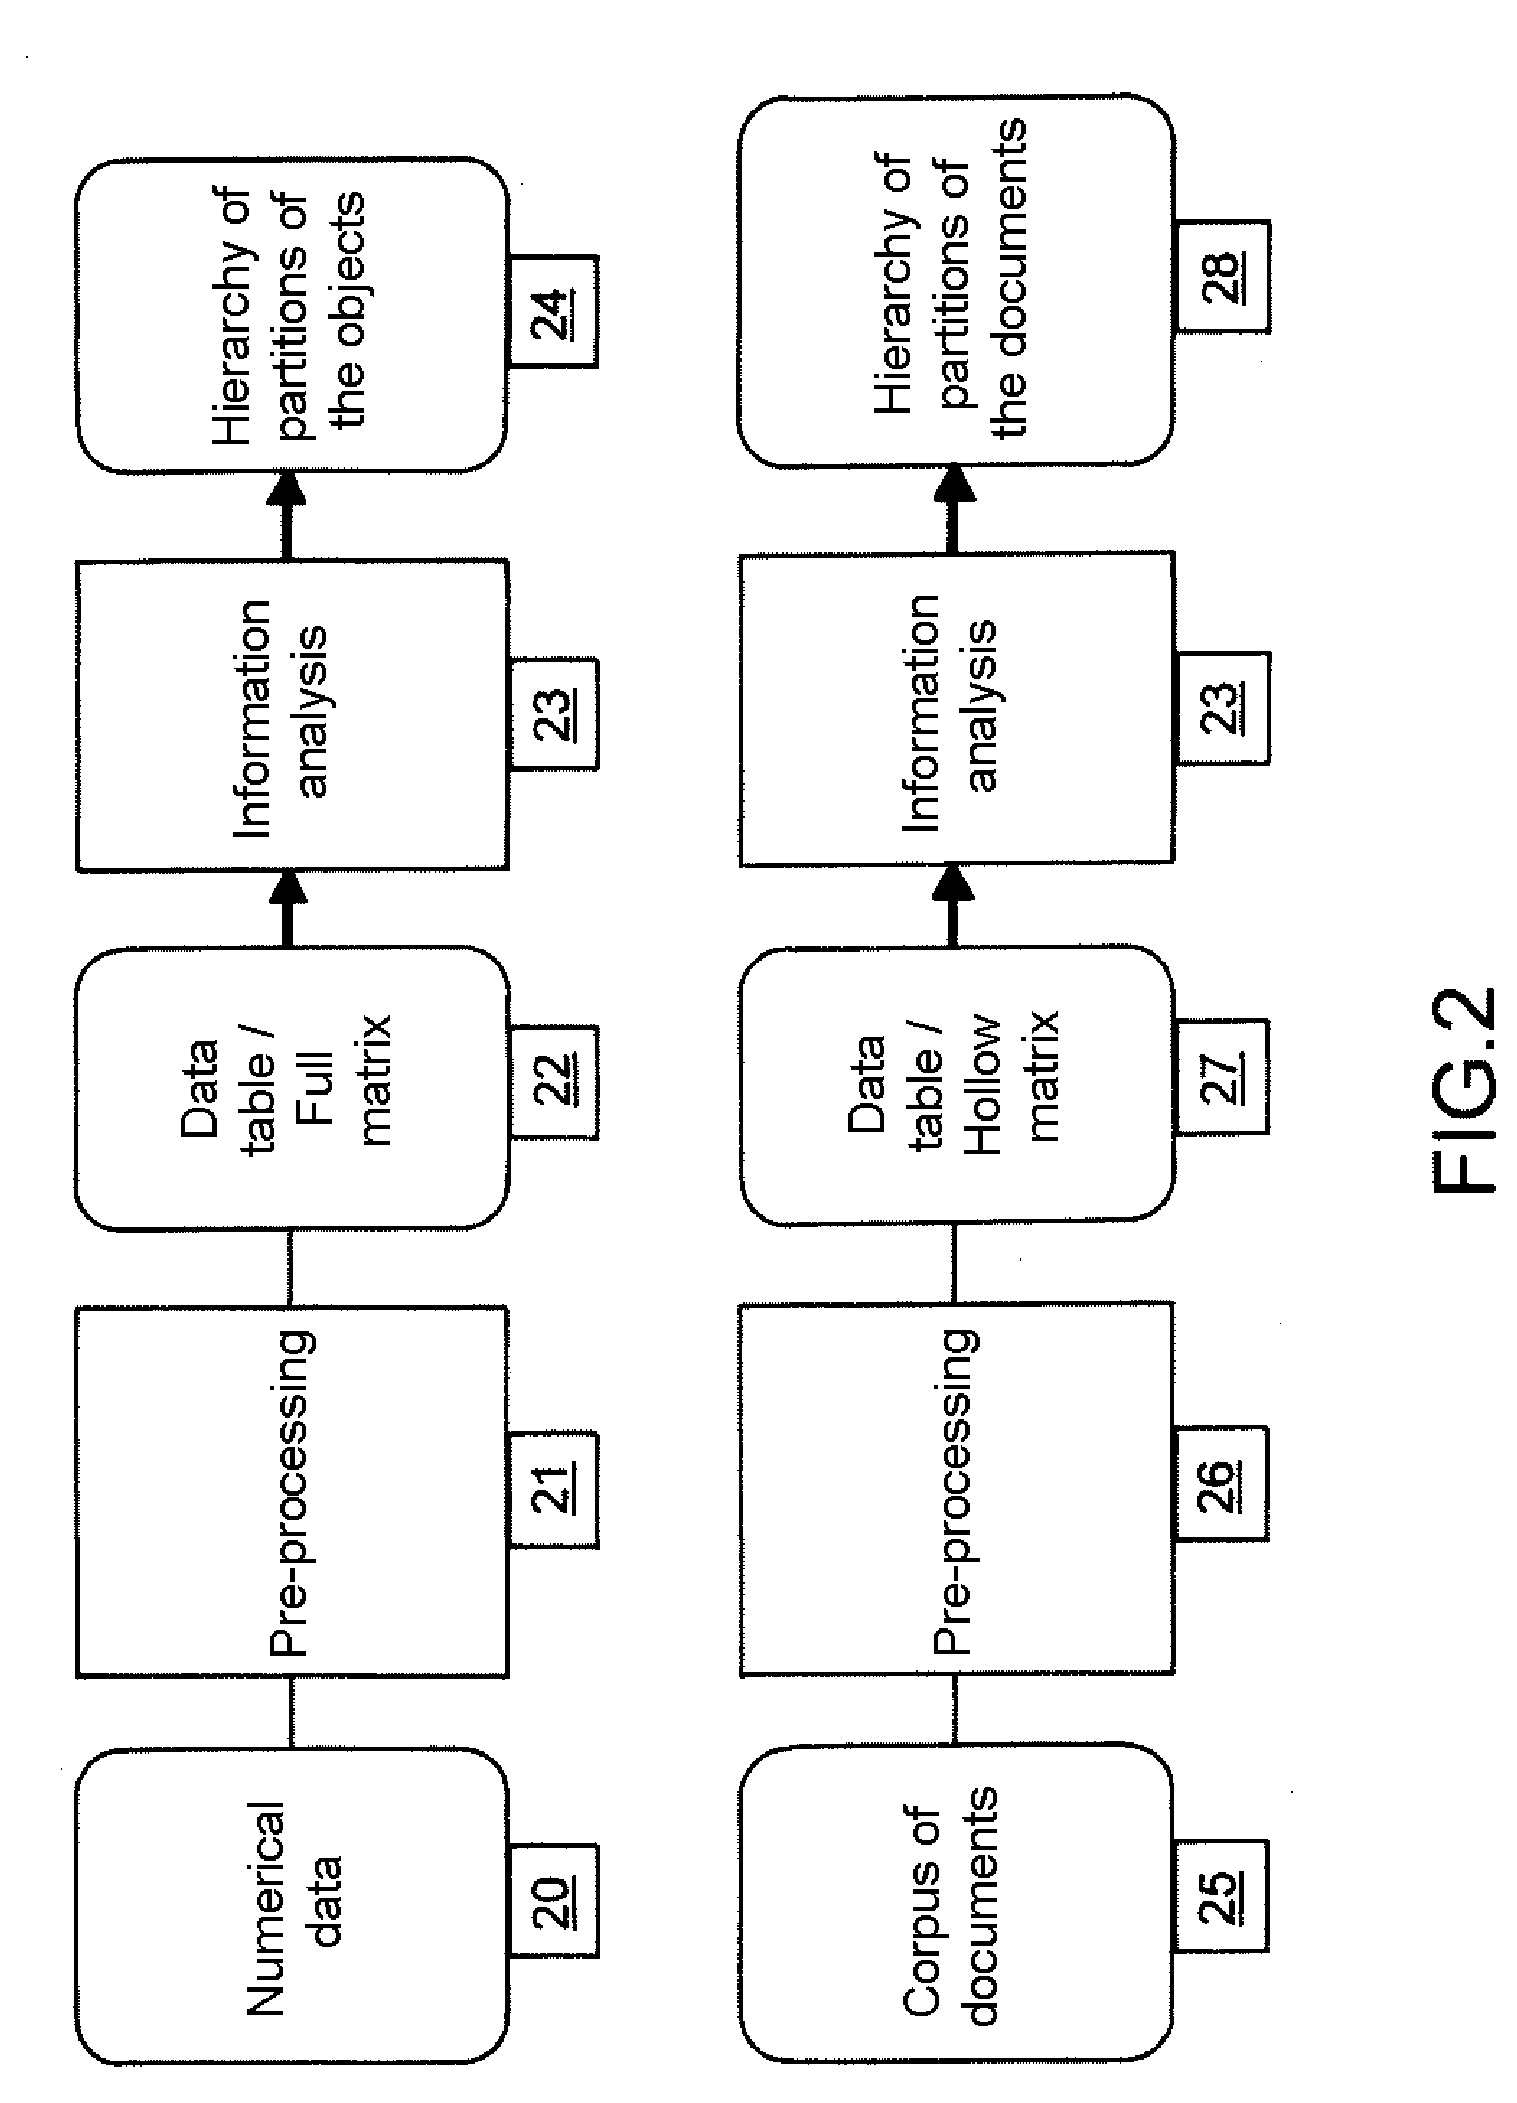 Method for stable and linear unsupervised classification upon the command on objects